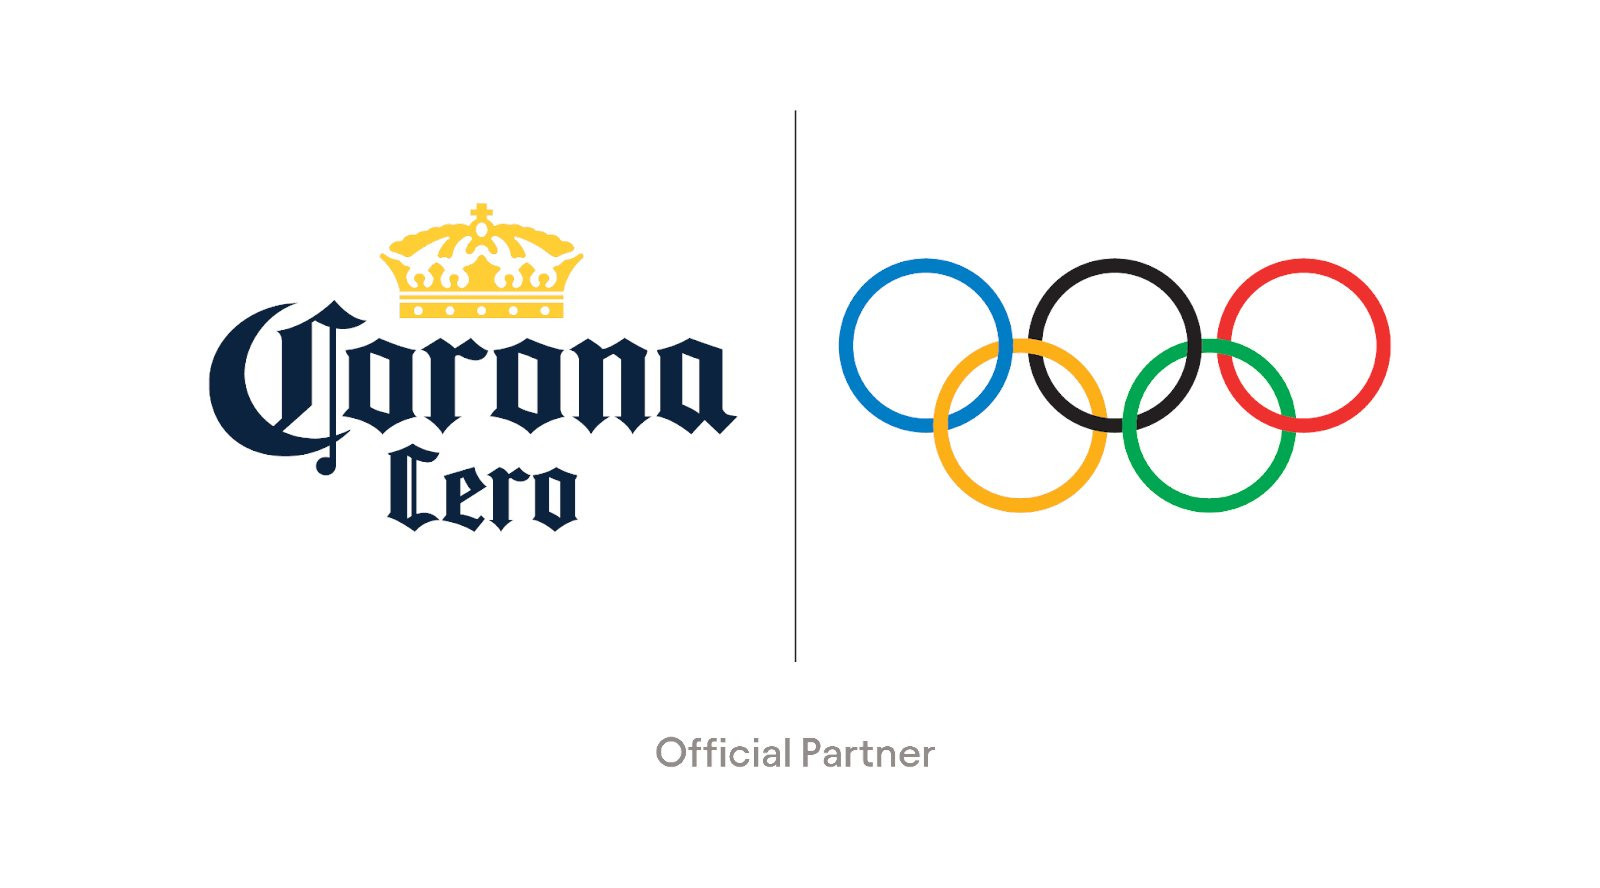 Corona Cero becomes first Worldwide Olympic Partner to sponsor the Olympics